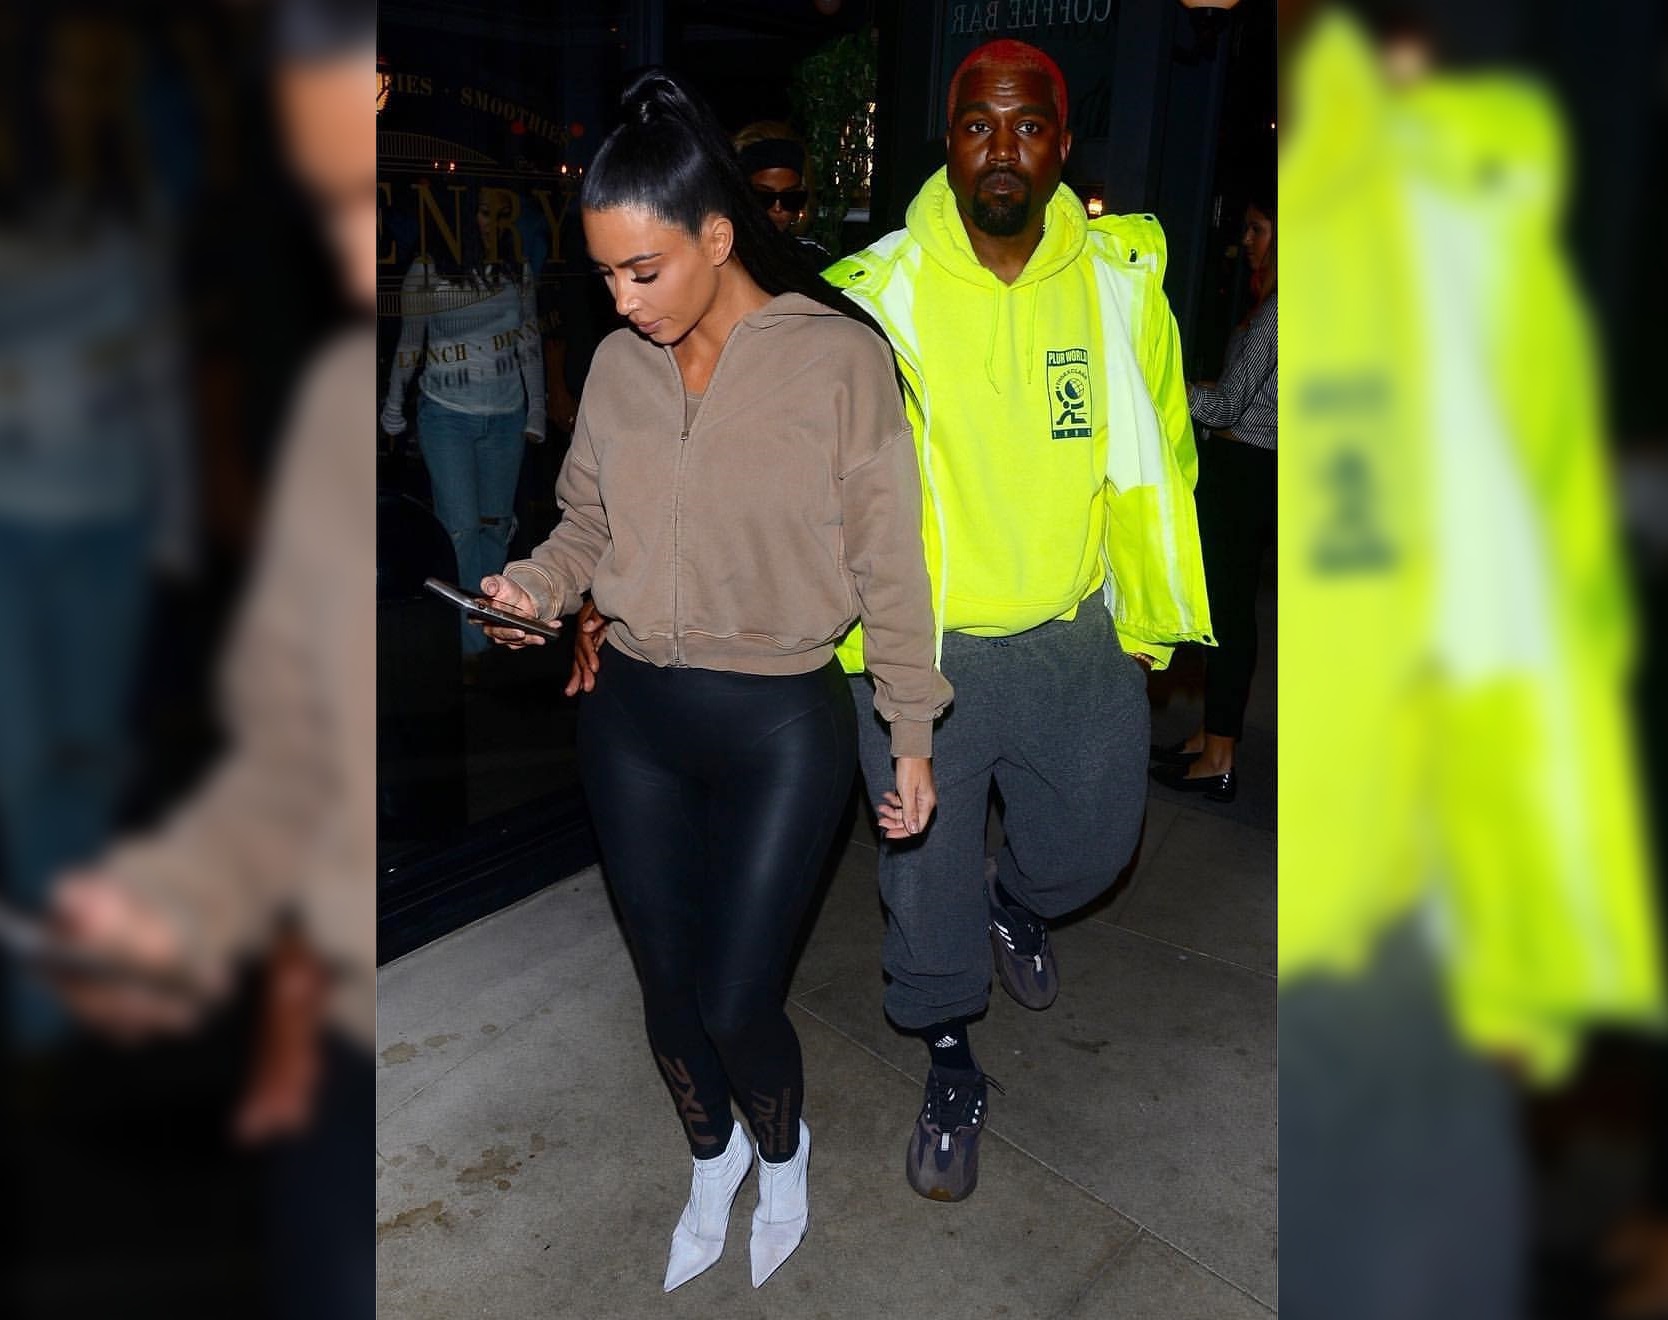 SPOTTED: Kanye West and Kim Kardashian Go for Contrasting Bold and Subtle Aesthetics